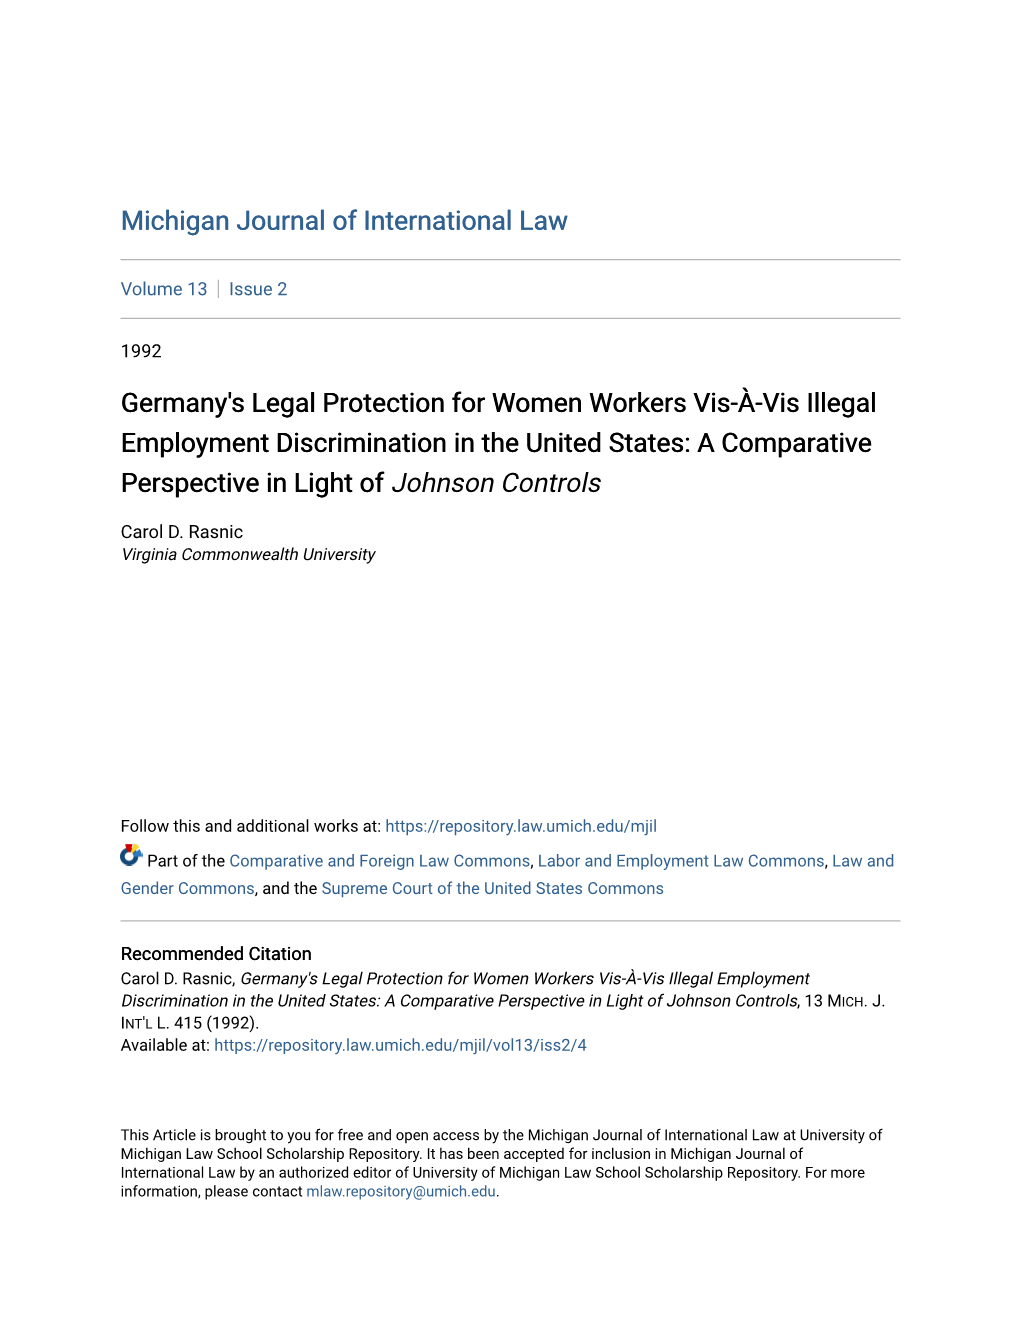 Germany's Legal Protection for Women Workers Vis-À-Vis Illegal Employment Discrimination in the United States: a Comparative Perspective in Light of Johnson Controls